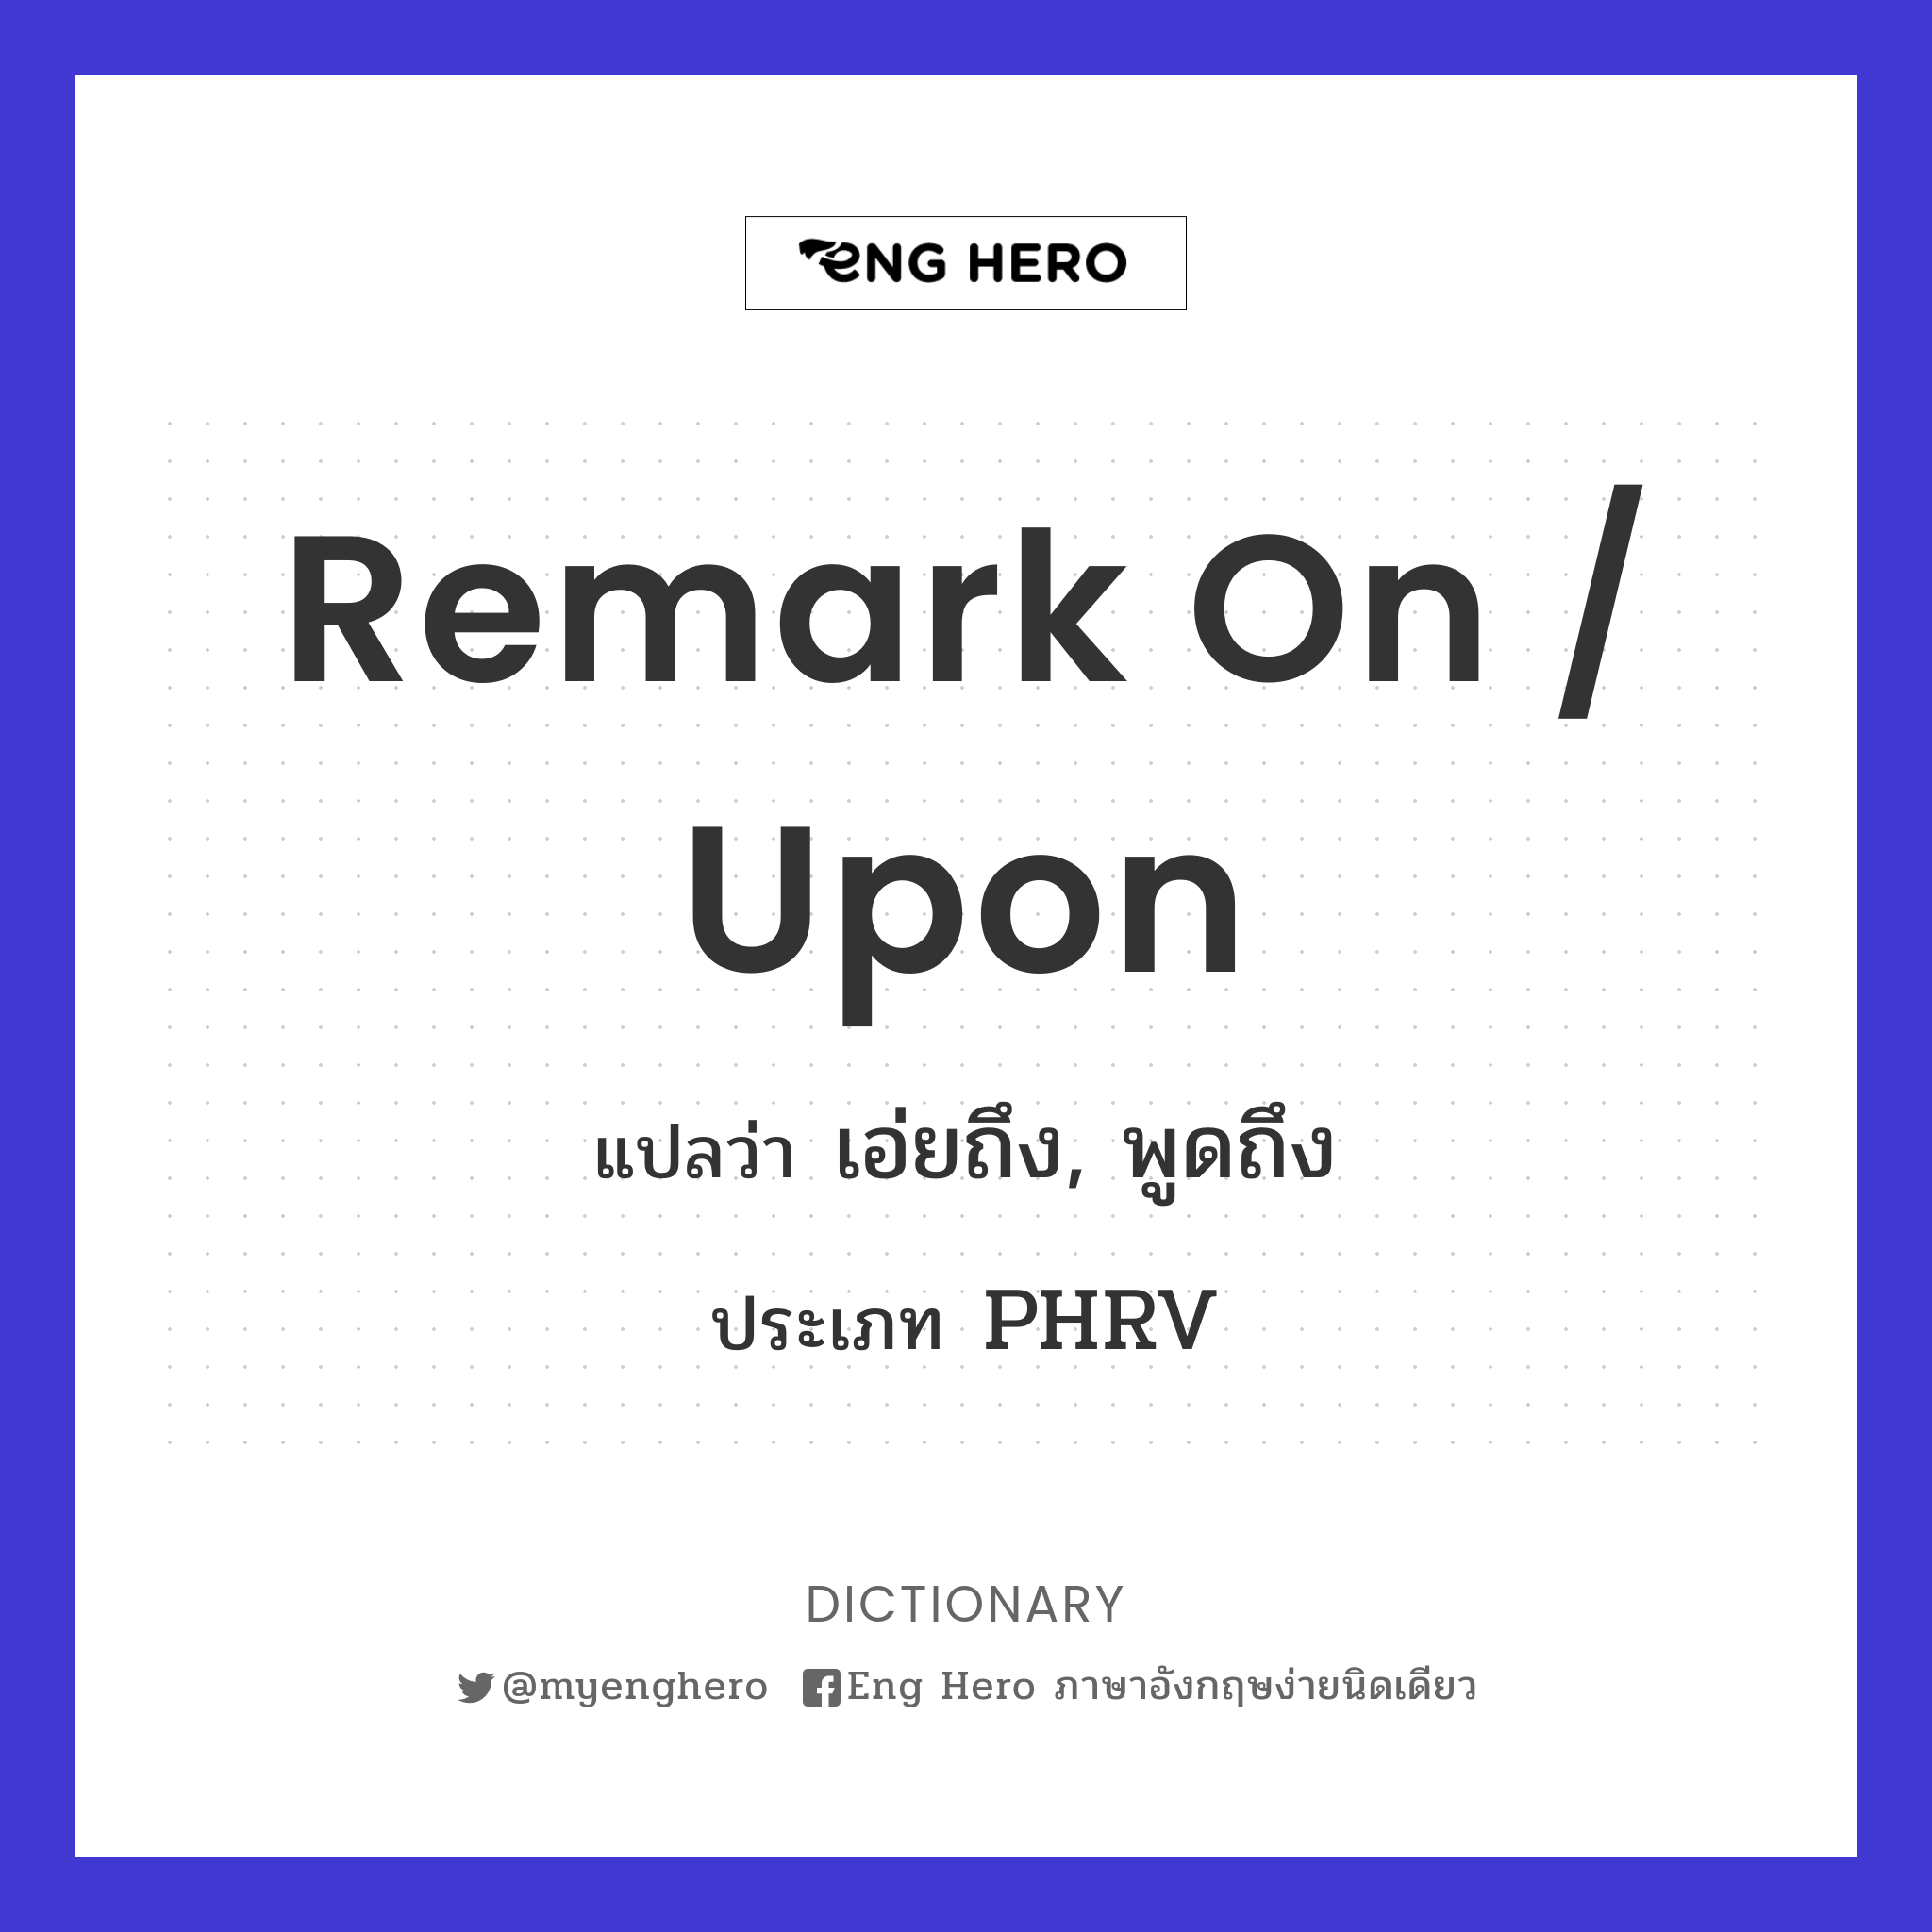 remark on / upon